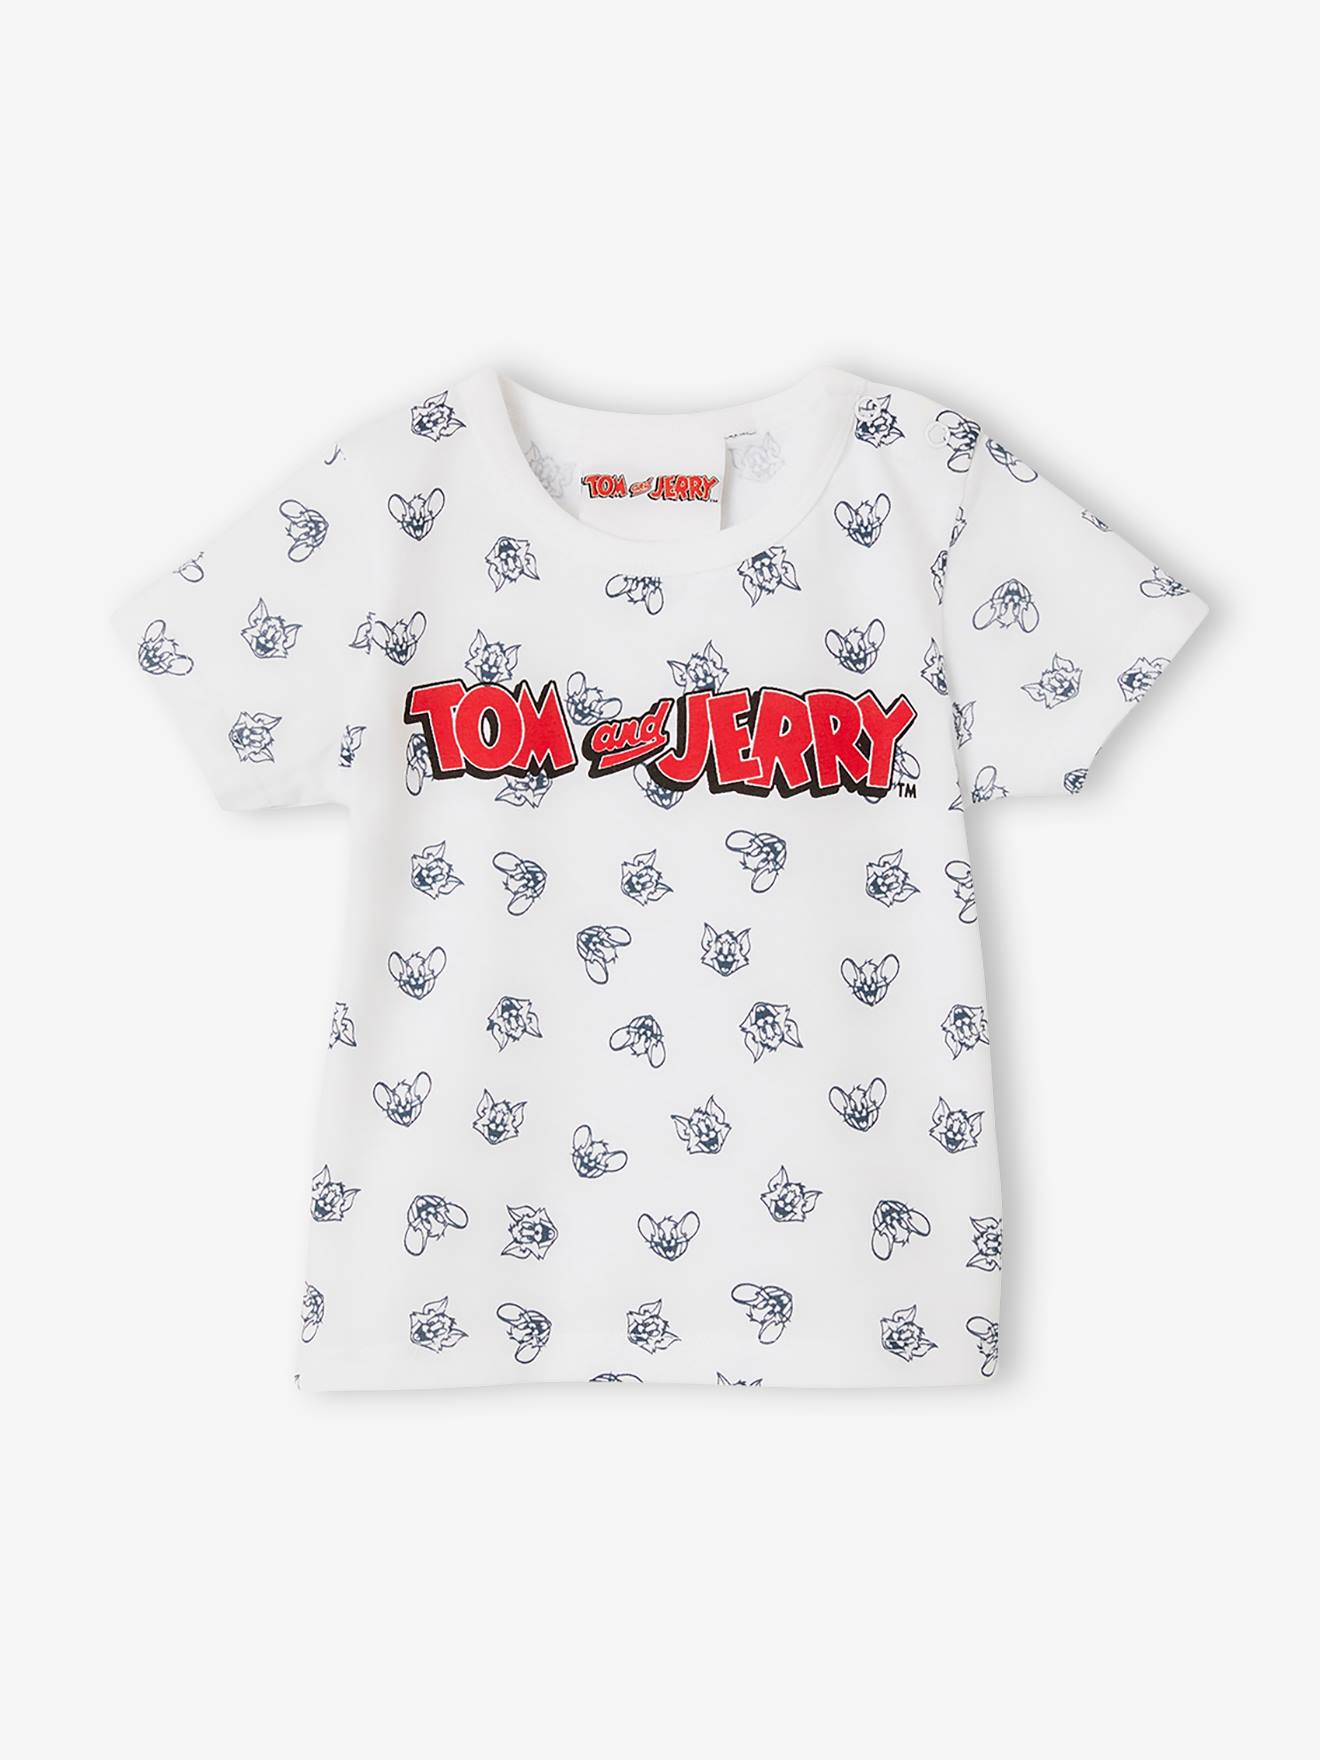 Tom & Jerry(r) T-Shirt for Babies white light all over printed